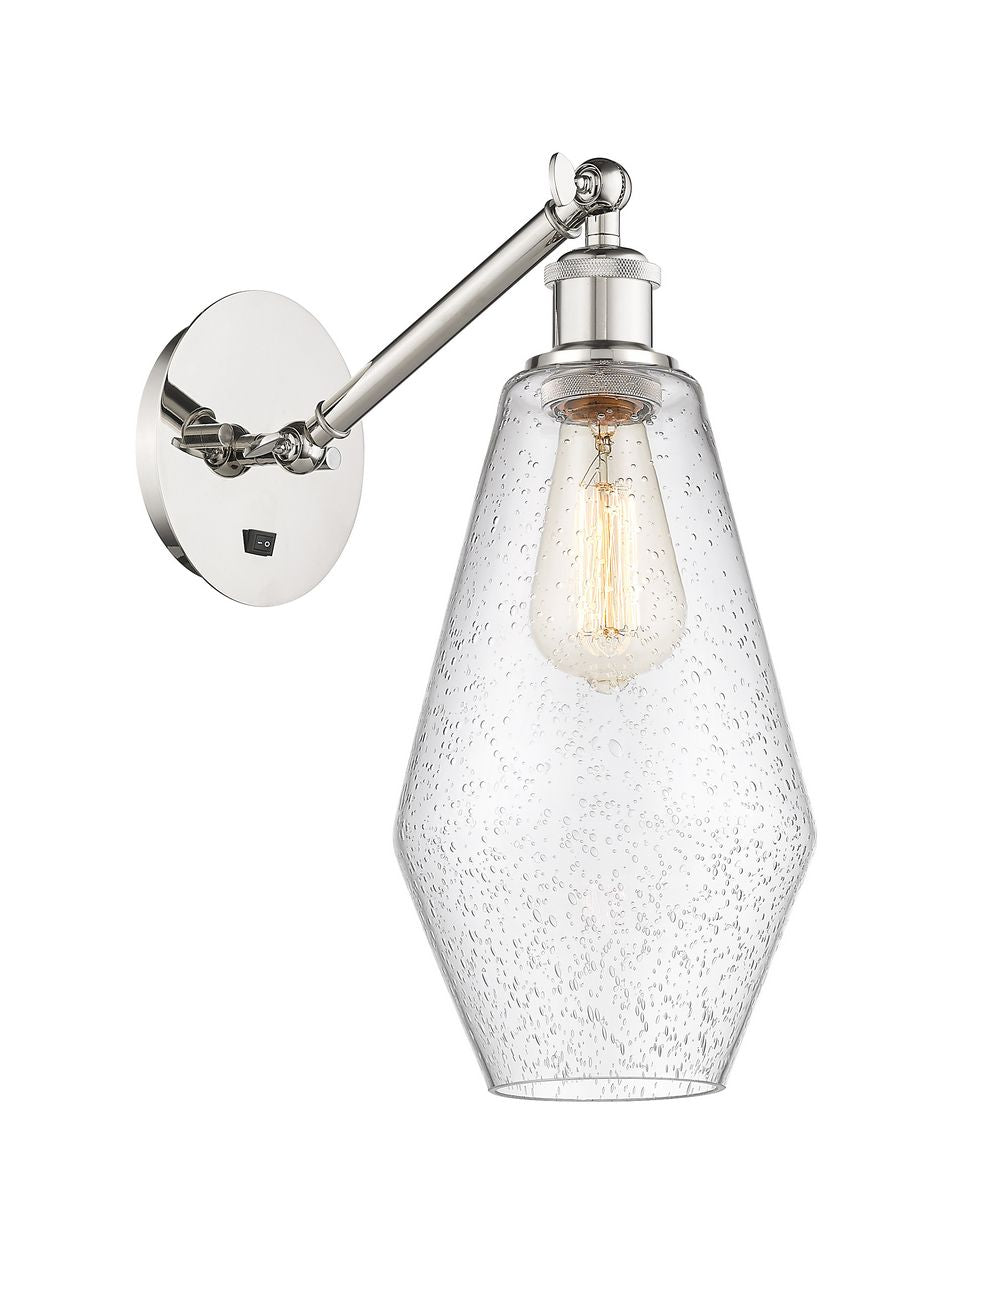 317-1W-PN-G654-7 1-Light 7" Polished Nickel Sconce - Seedy Cindyrella 7" Glass - LED Bulb - Dimmensions: 7 x 13.25 x 16 - Glass Up or Down: Yes